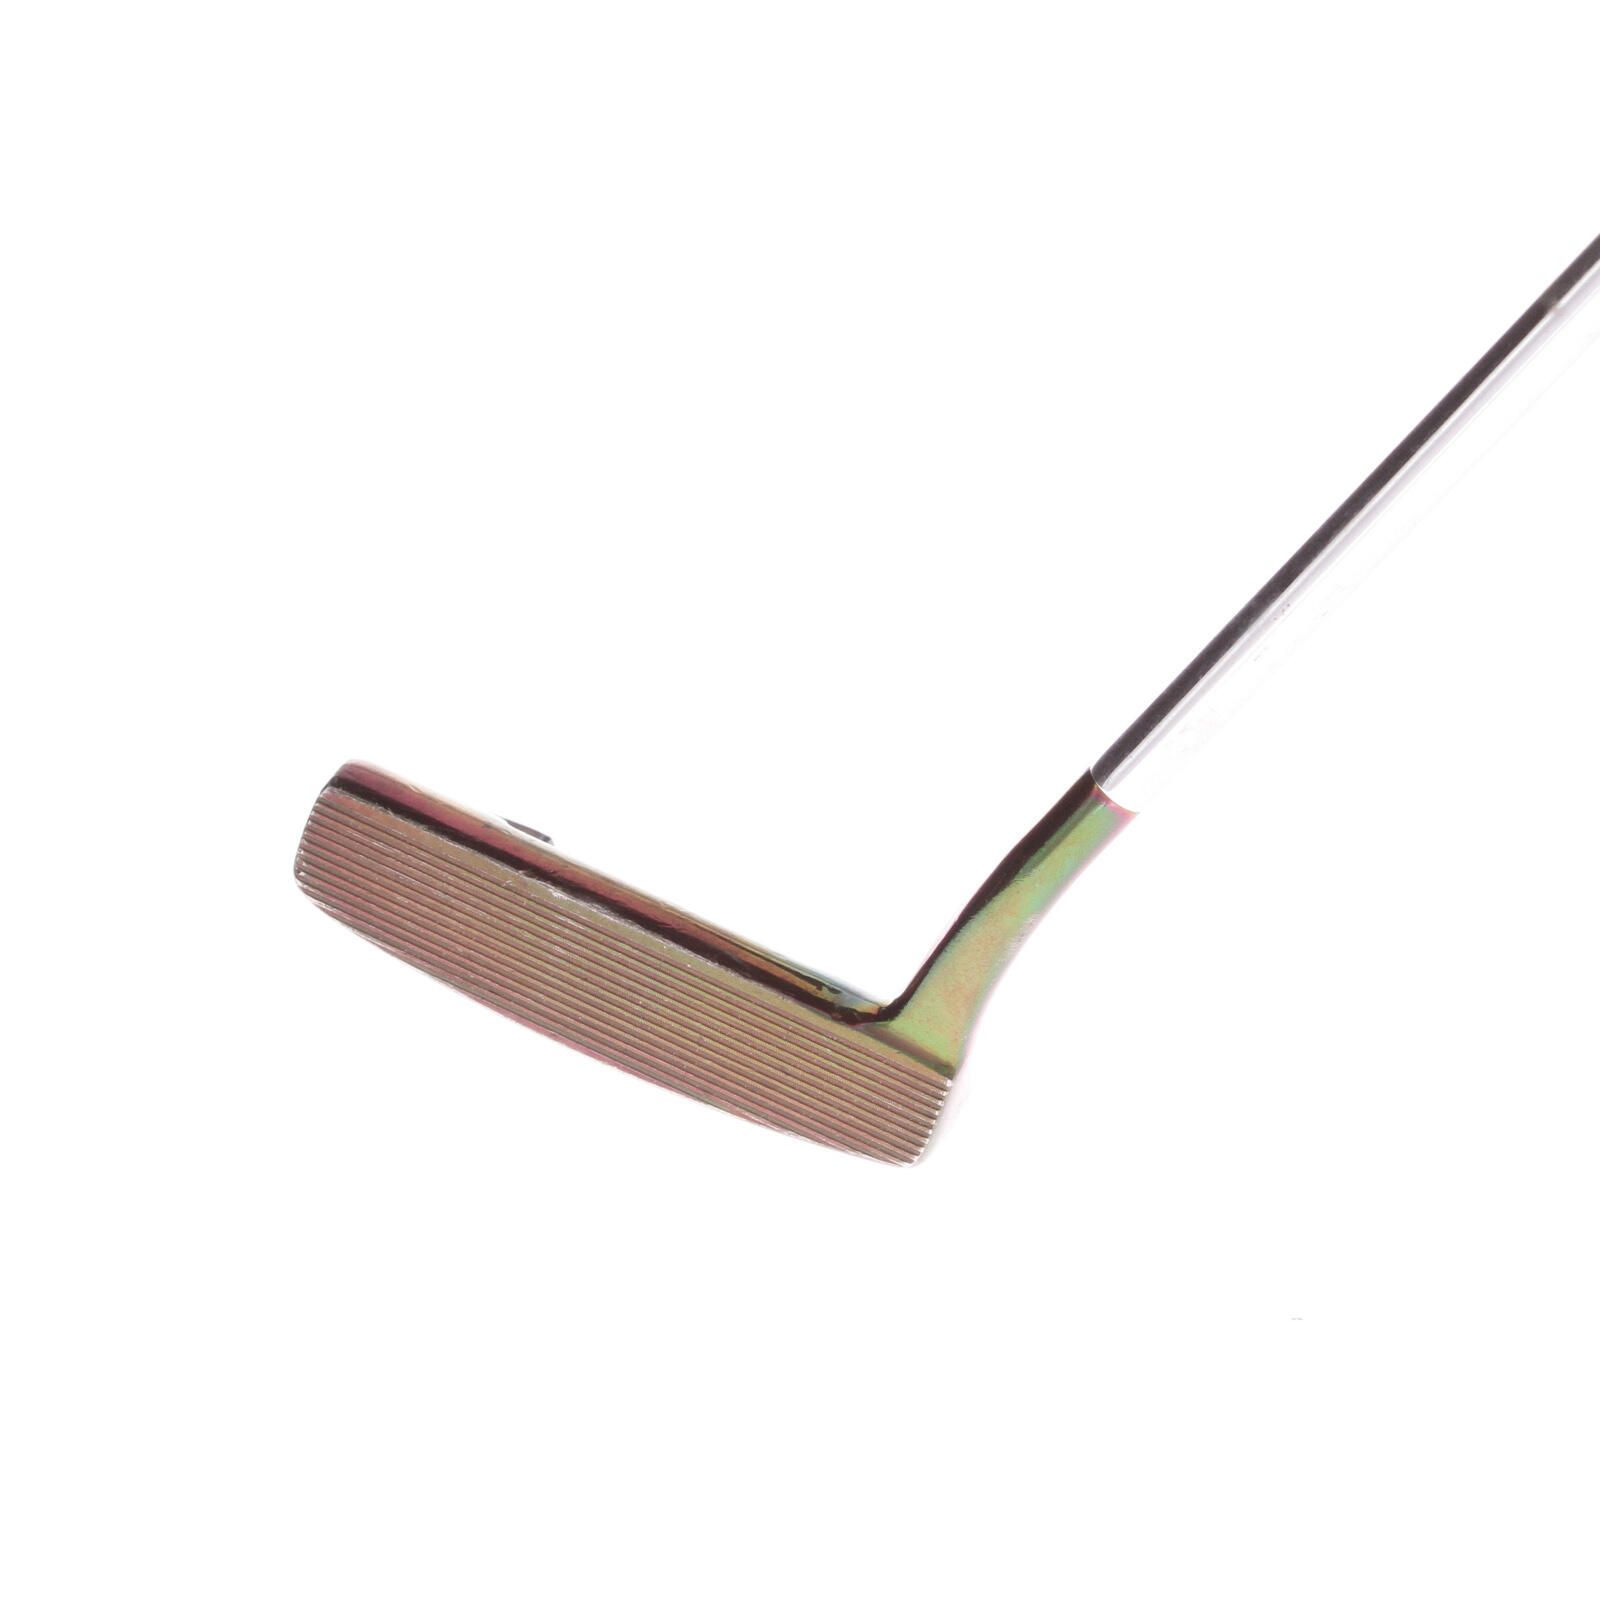 USED - Rife Abaco Putter 31 Inches Length Steel Shaft Right Handed - GRADE B 3/6